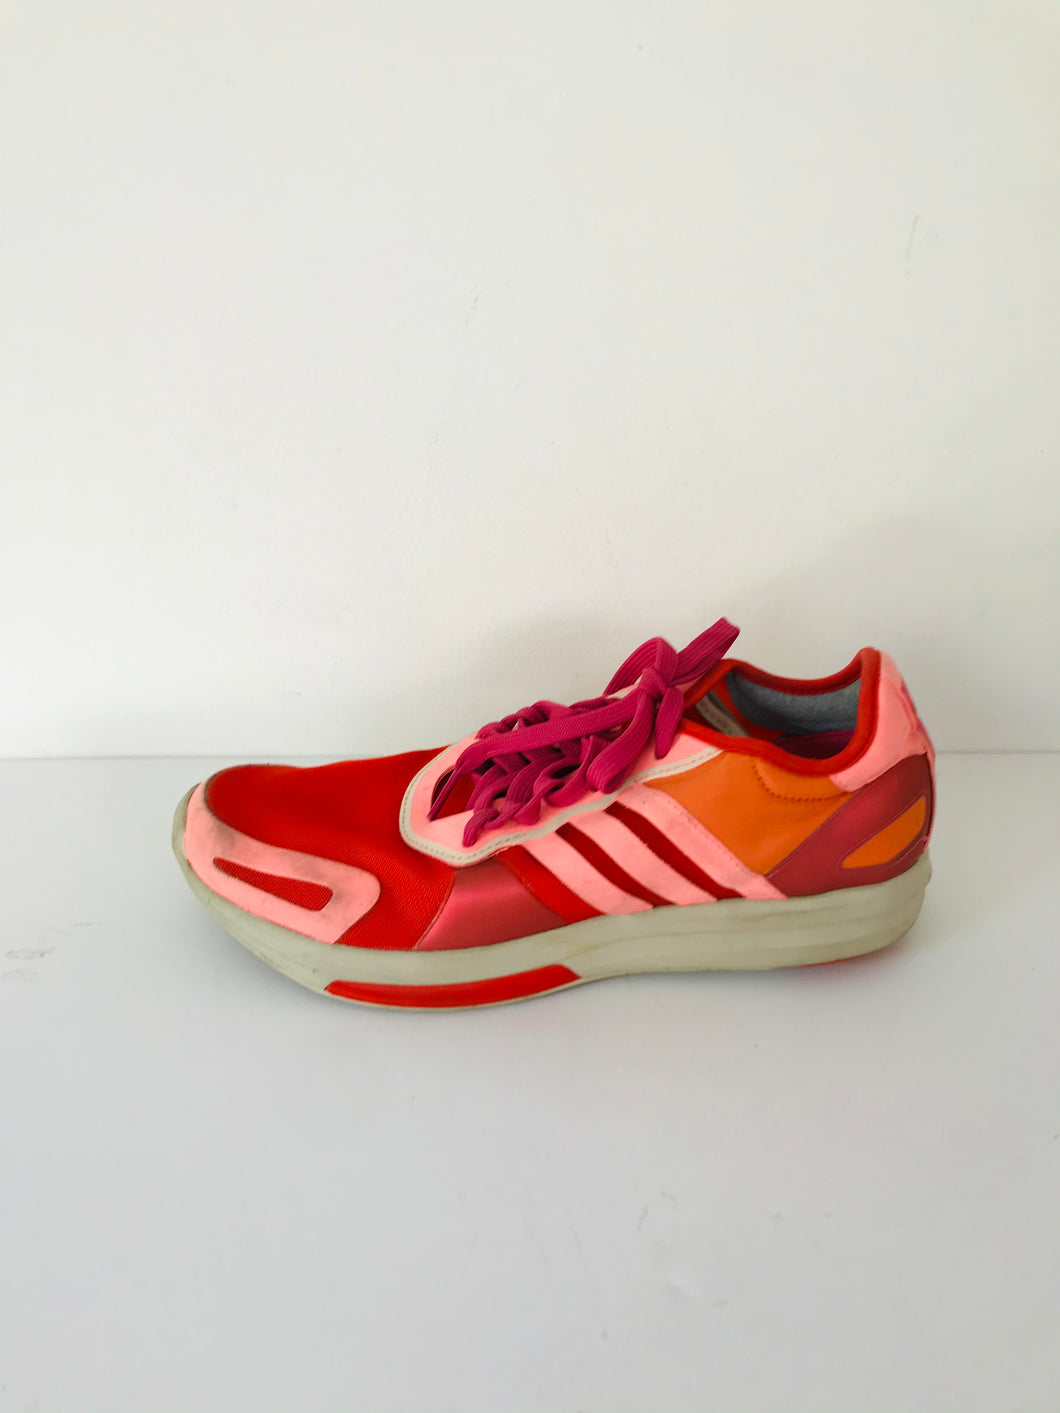 adidas by Stella McCartney Women's Athletic Running Trainers | UK6.5 | Multicolour